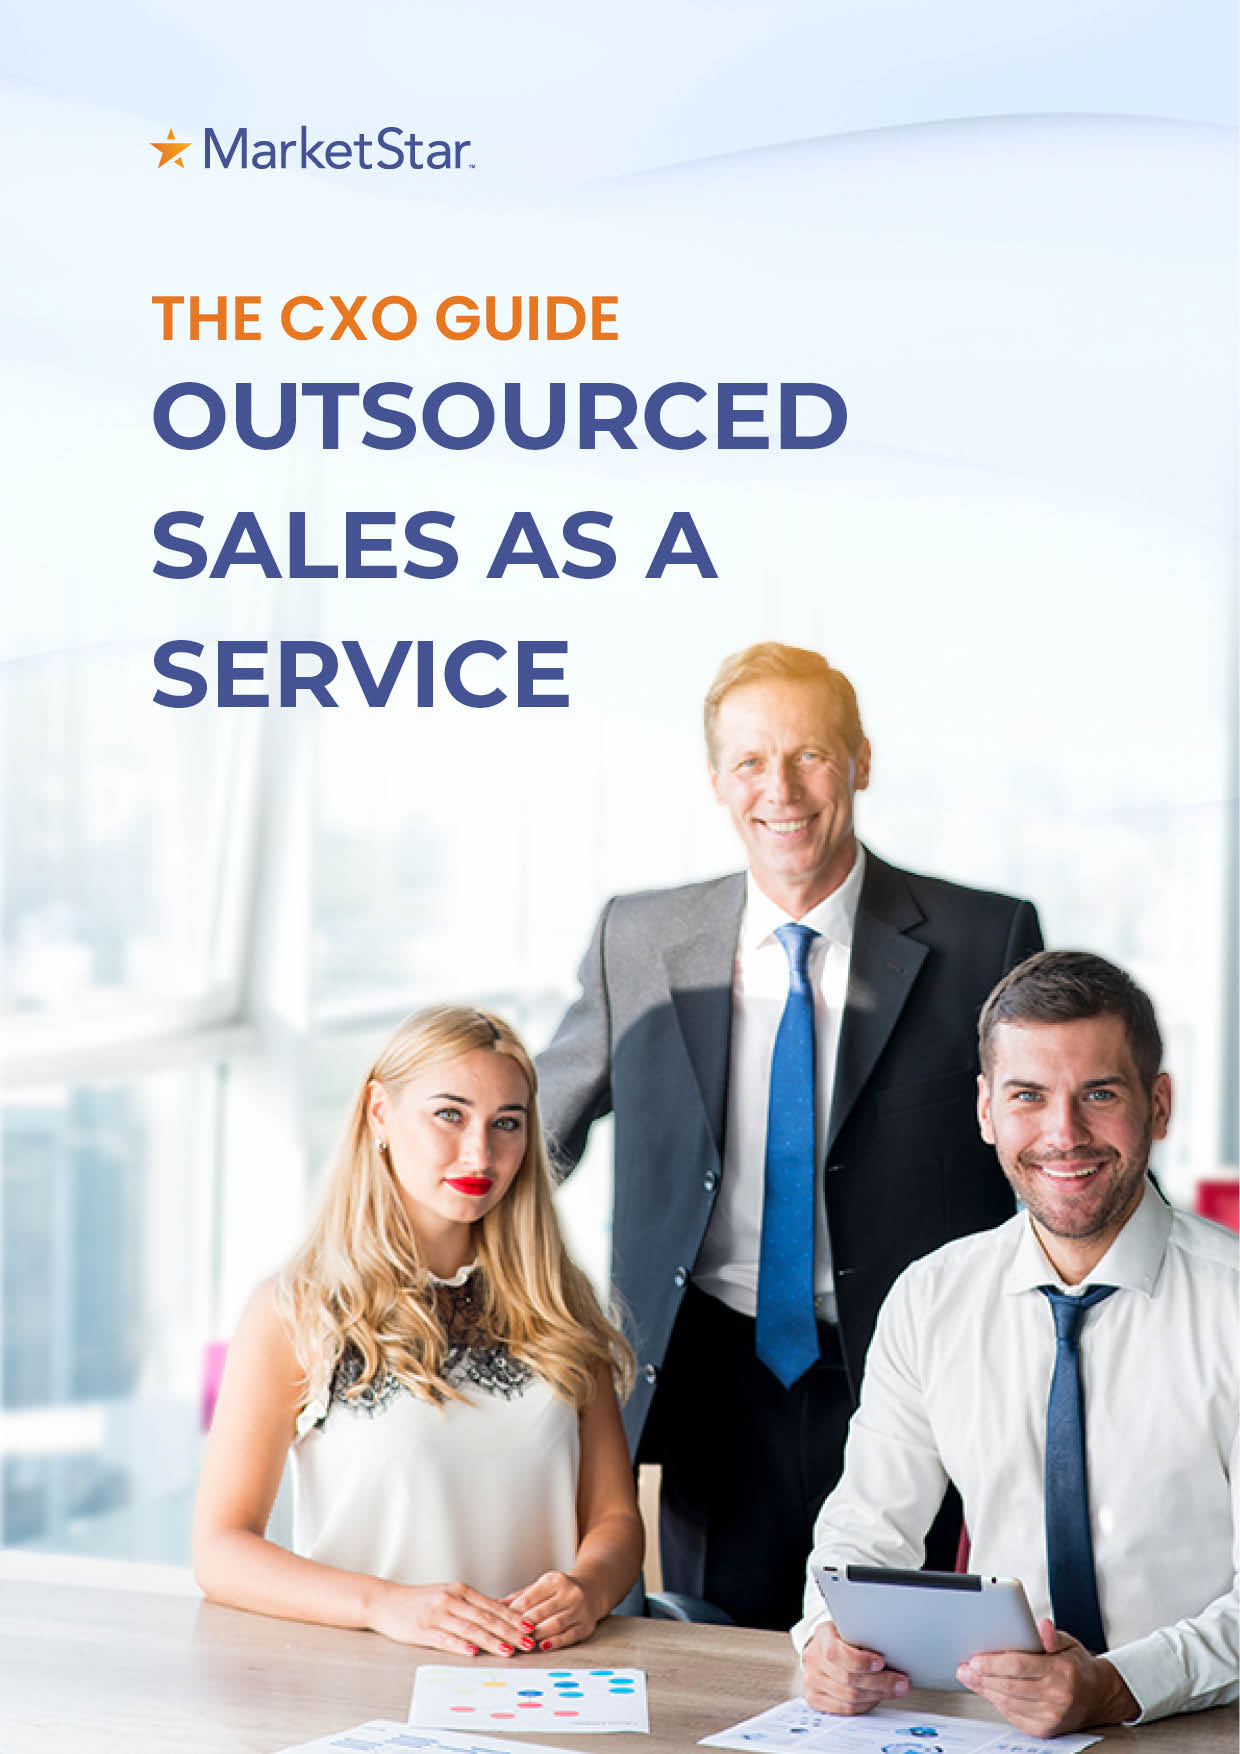 Outsourced sales as a service